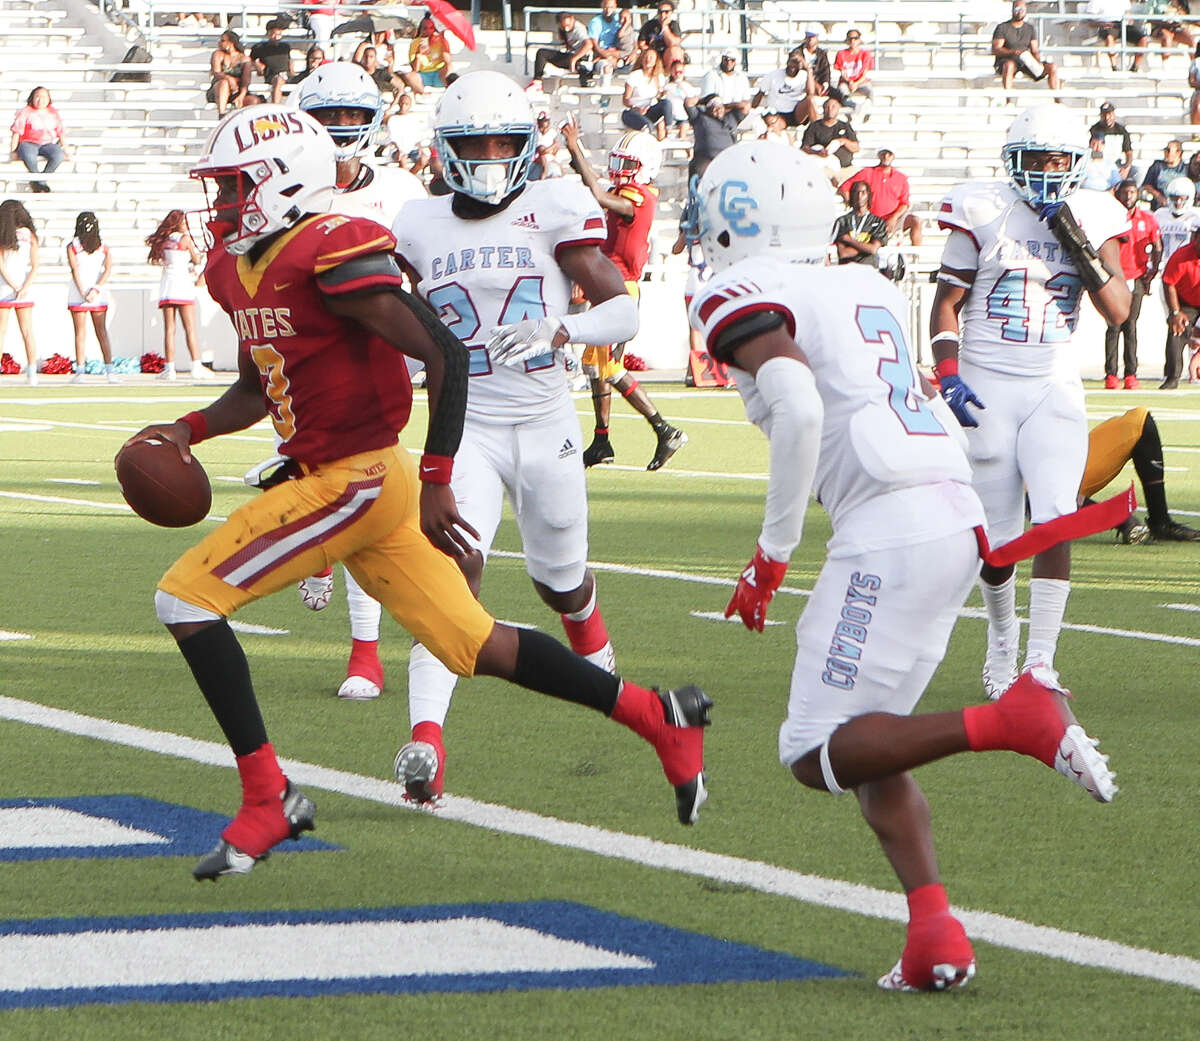 Yates quarterback Jaquan Brandon (3) runs for a 7-yard touchdown during the second quarter of a non-district high school football game at Delmar Stadium, Saturday, Aug. 27, 2022, in Houston.